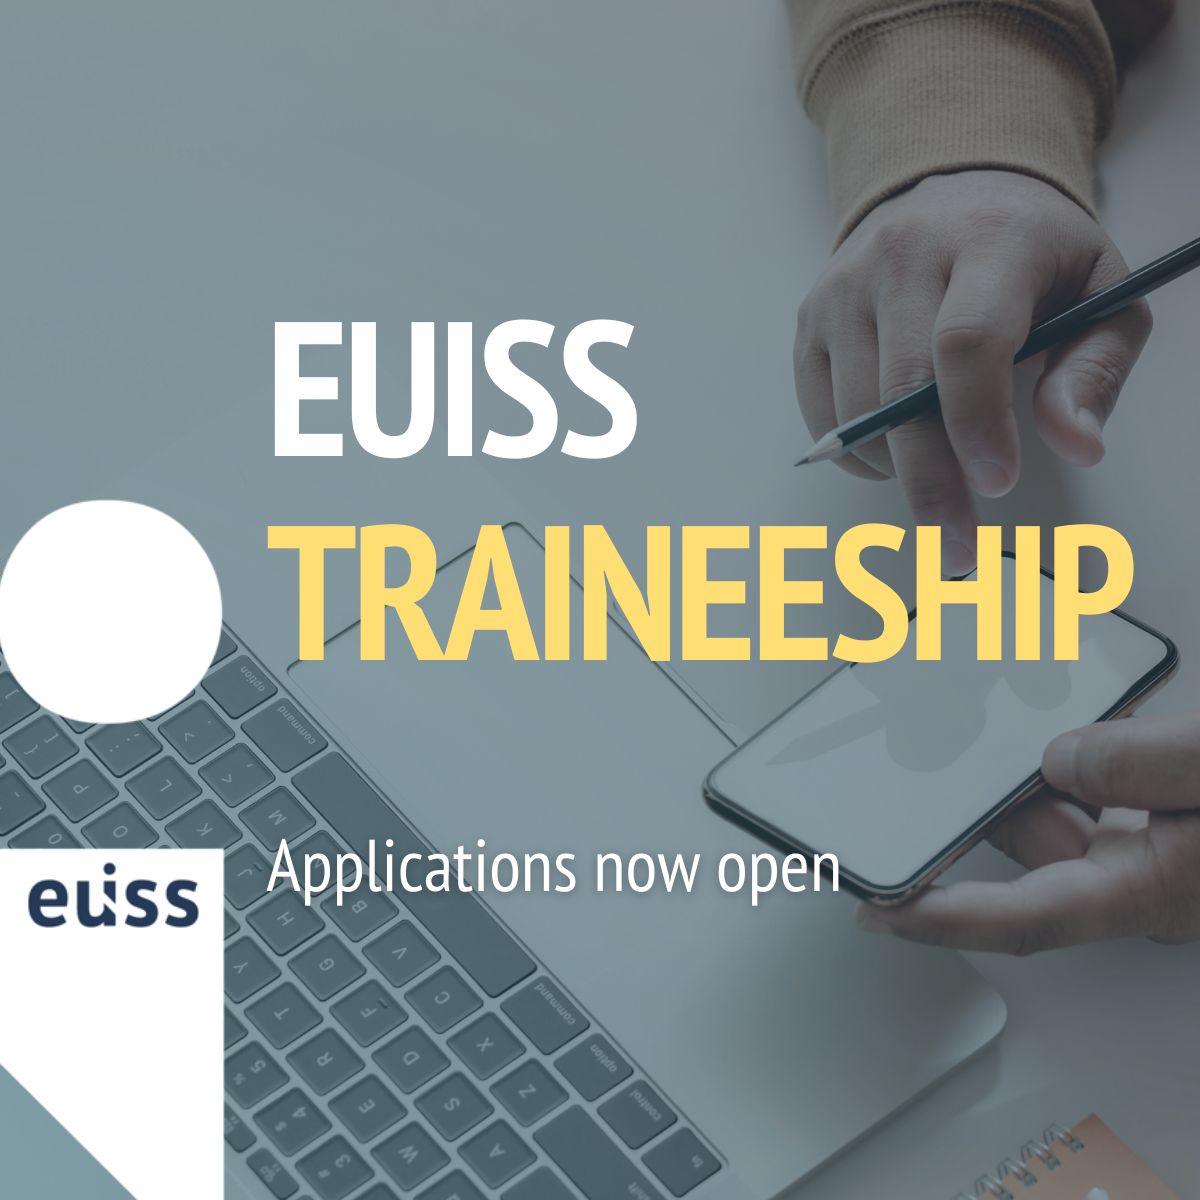 EUISS Traineeship 2024-2025: 10 months in Paris & Brussels. Assist in research/events. Master’s degree required, English fluency (French a plus). Monthly grant, flexible teleworking. Apply by May 3, 2024. Link shorturl.at/eftzT #Traineeship #EUISS #ApplyNow